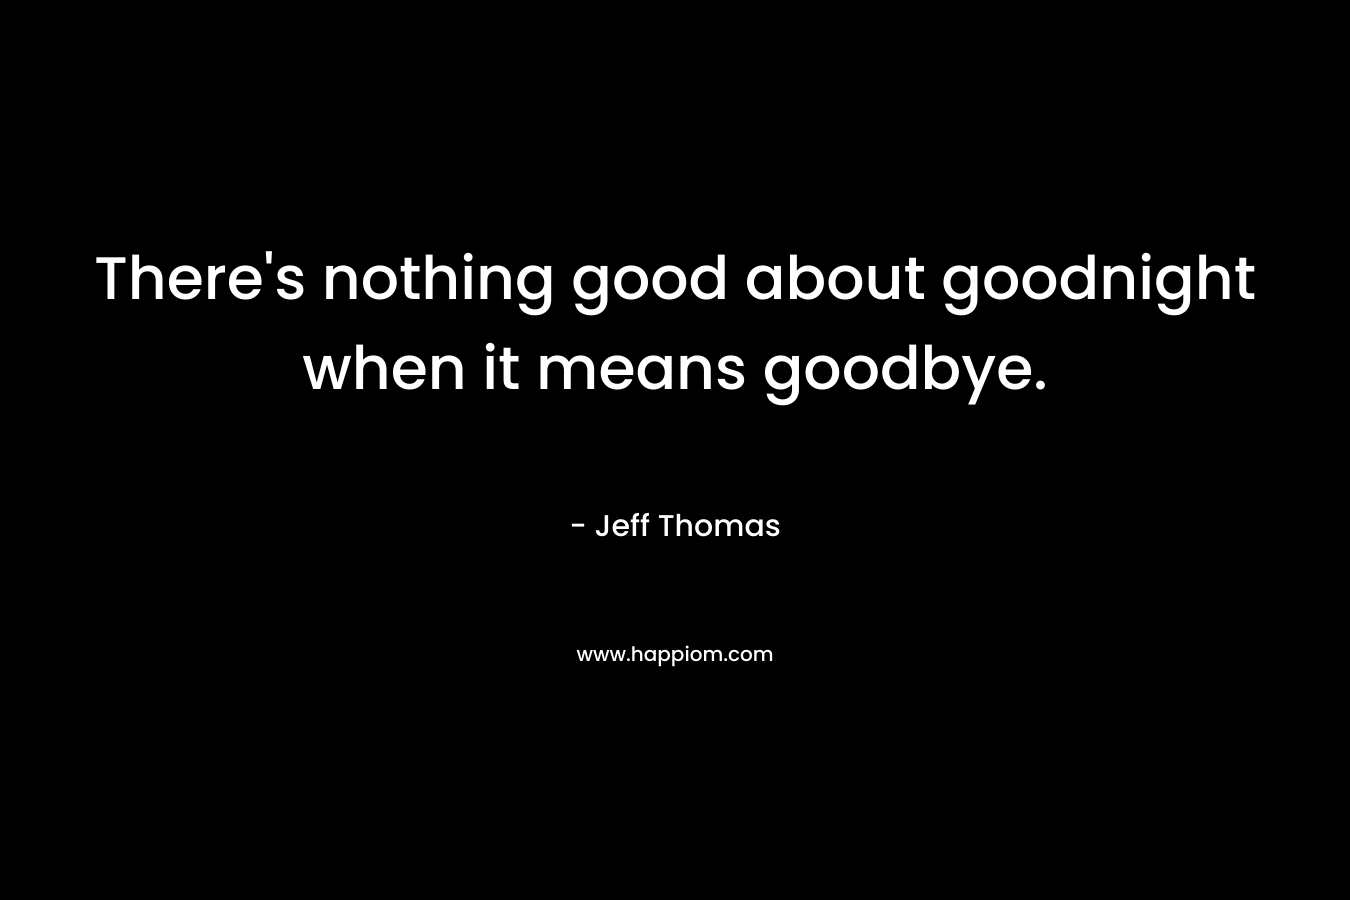 There's nothing good about goodnight when it means goodbye.